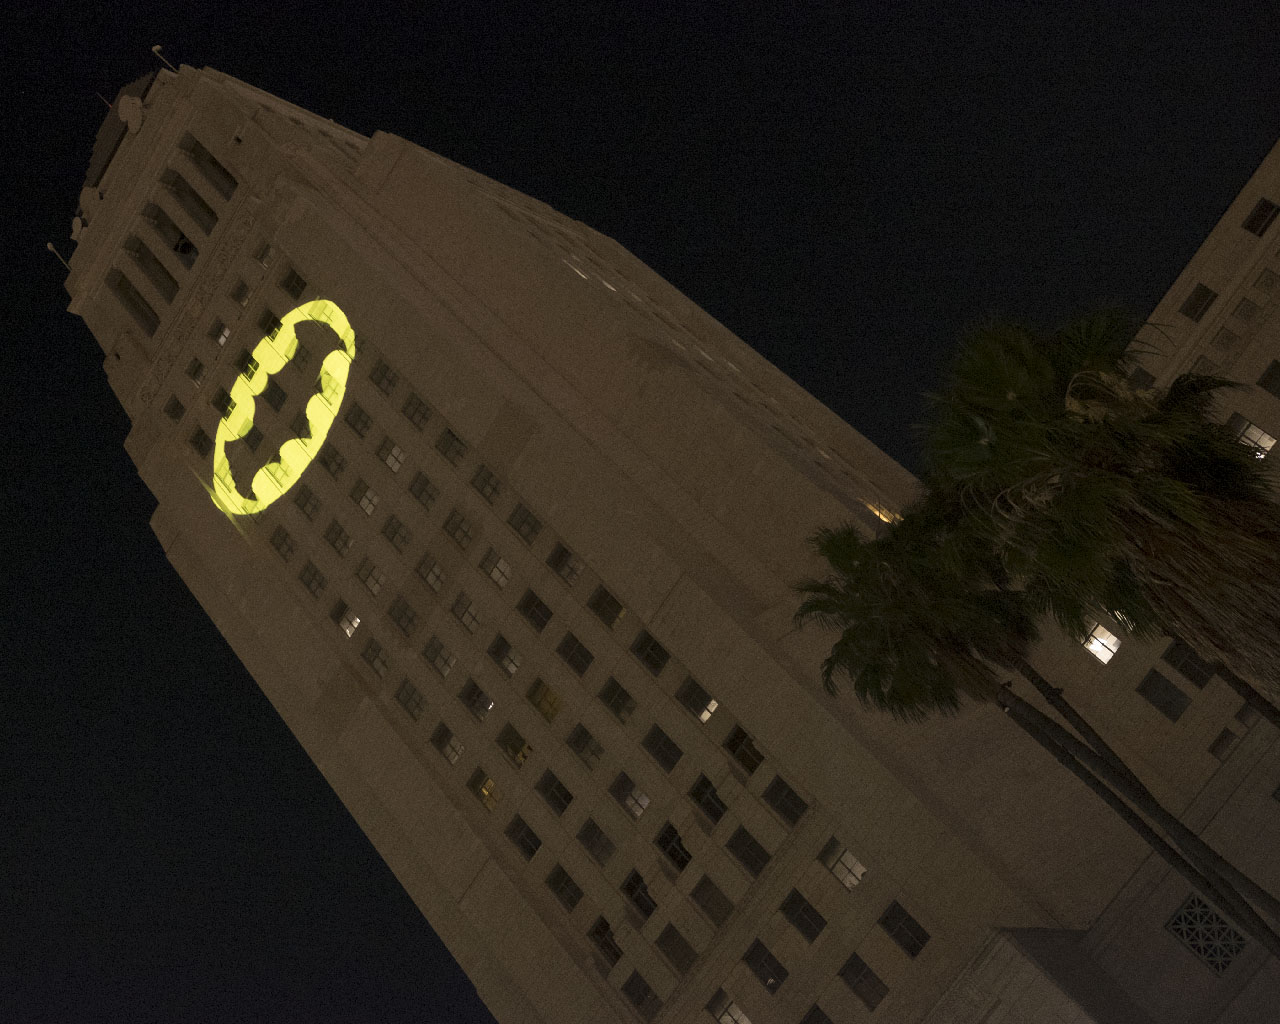 Batsignal on LA City Hall. Isn't that also the Daily Planet building?